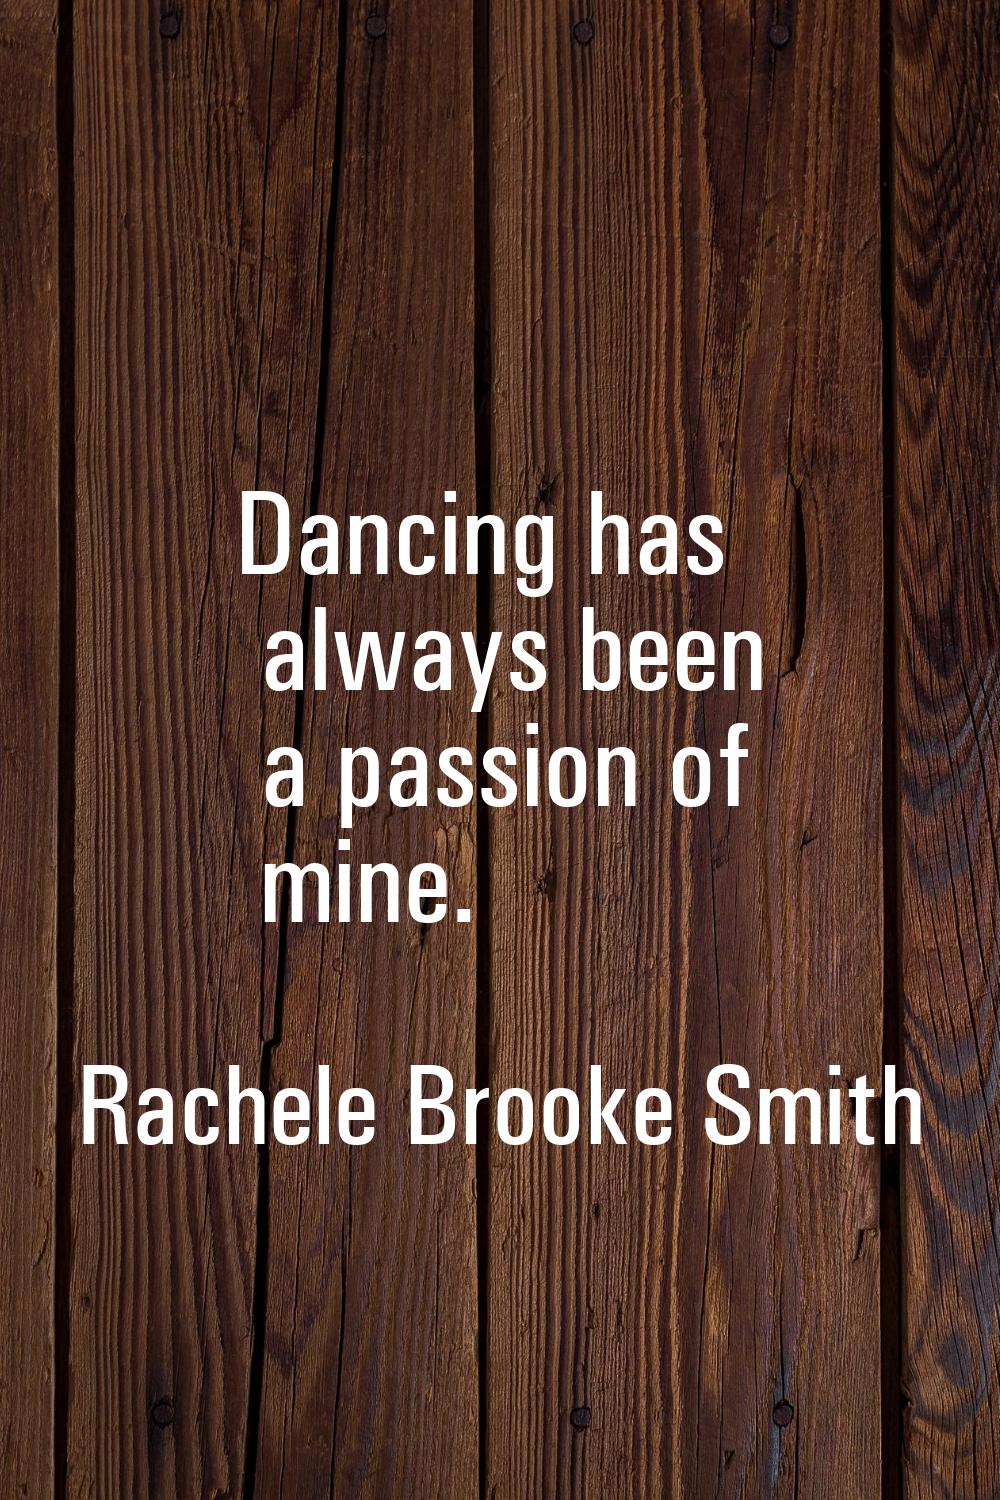 Dancing has always been a passion of mine.